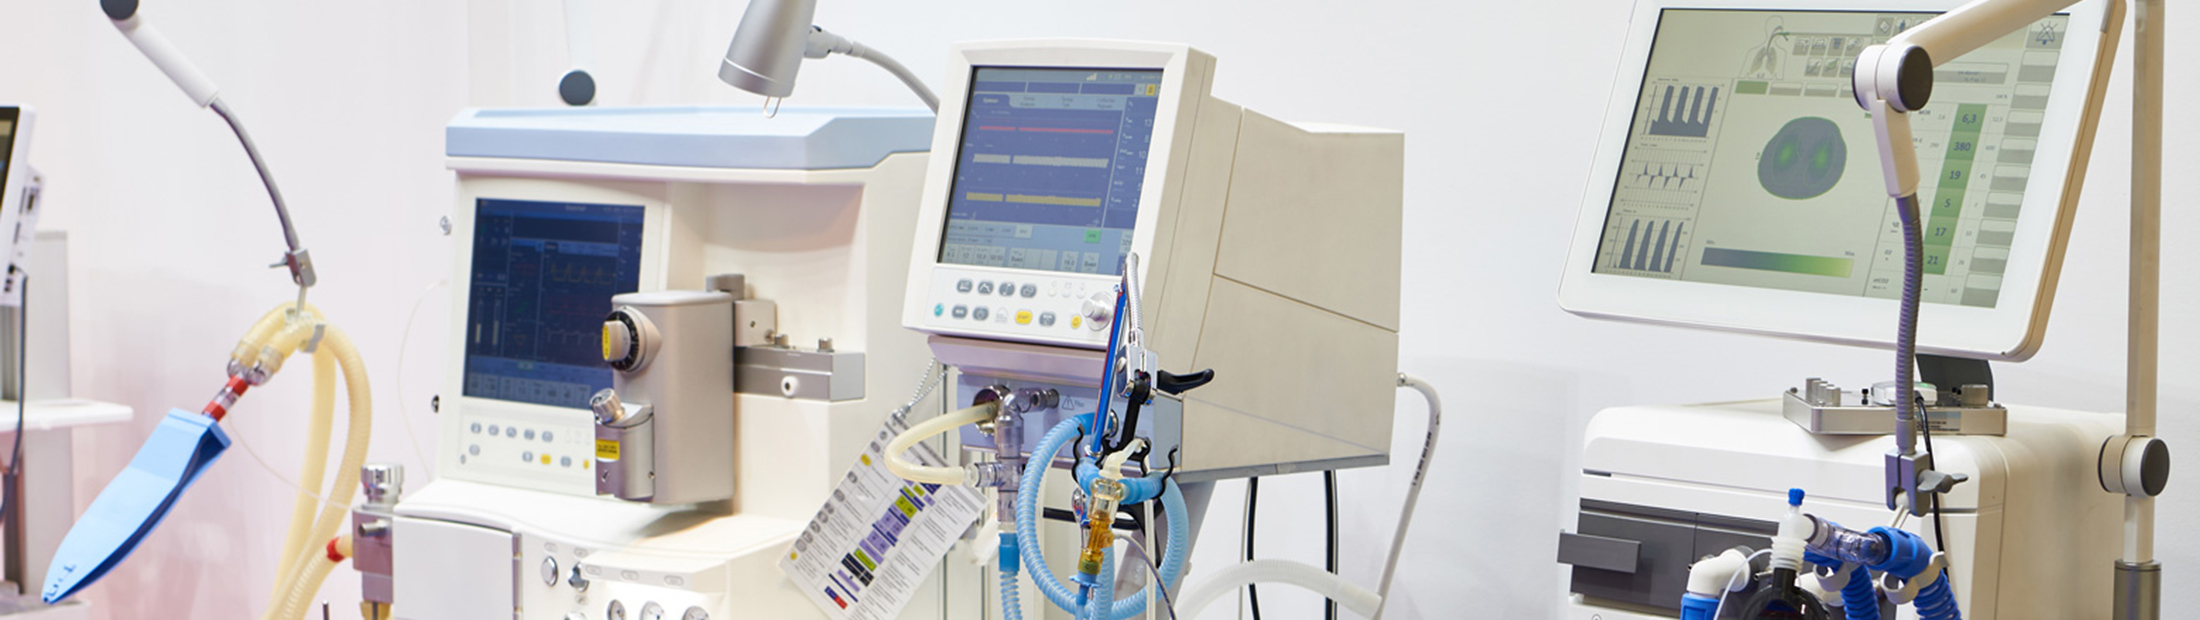 Several monitors and medical devices in a white room.